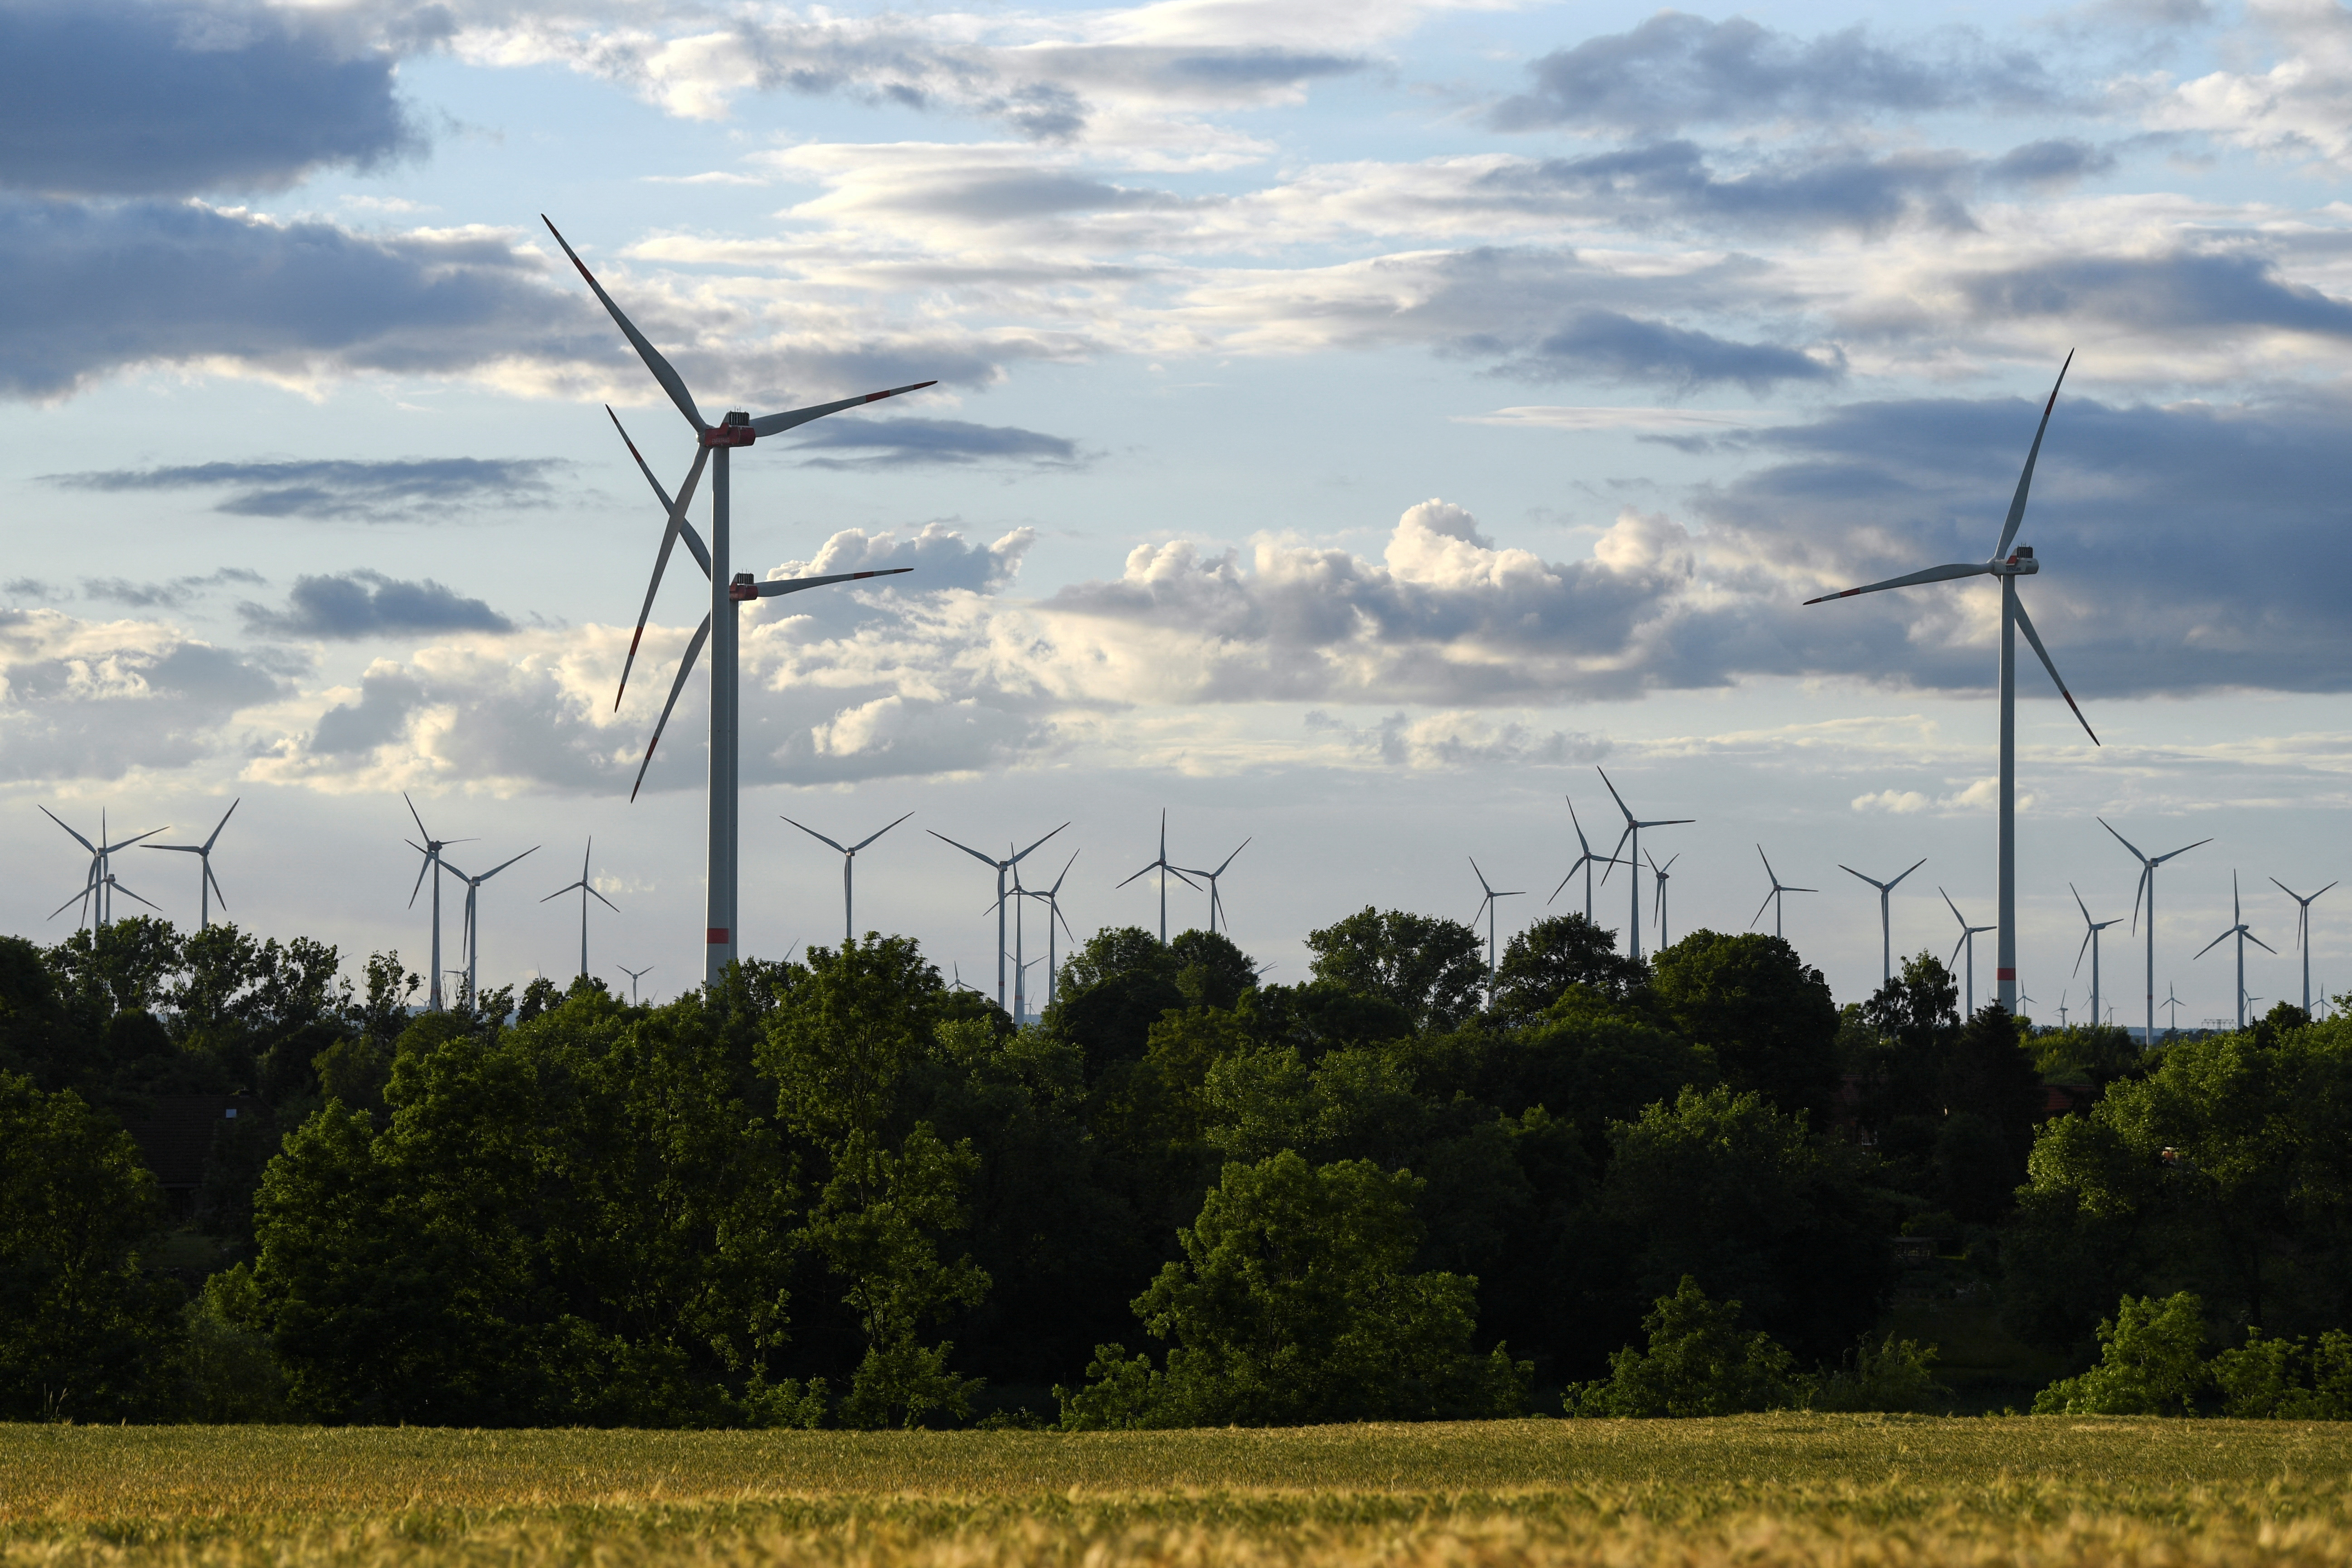 Power-generating wind turbines are pictured at a wind park near Prenzlau, Germany